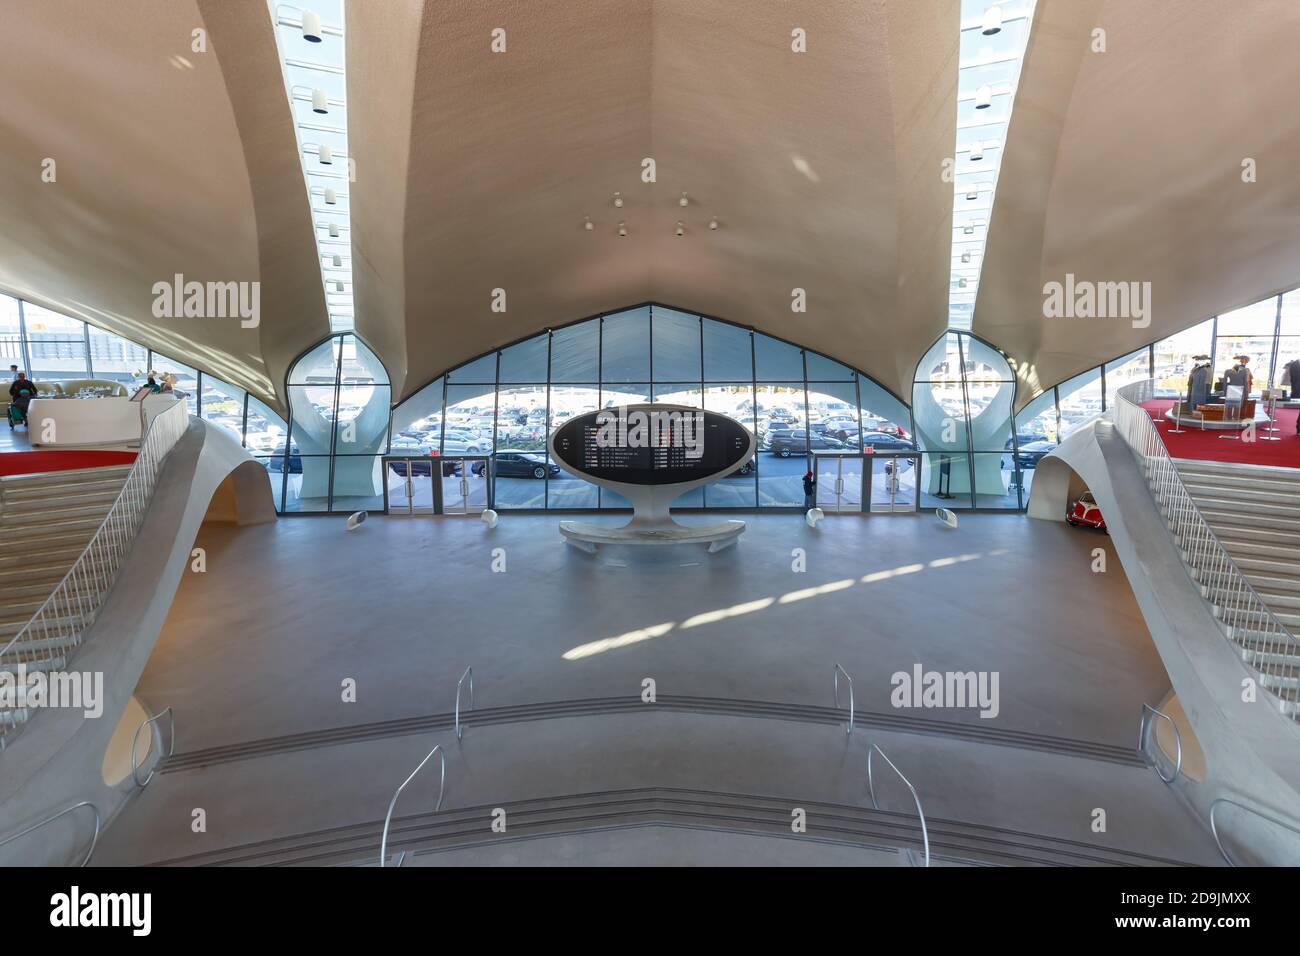 New York City, New York - March 1, 2020: TWA Hotel Terminal at New York JFK Airport in the United States. Stock Photo